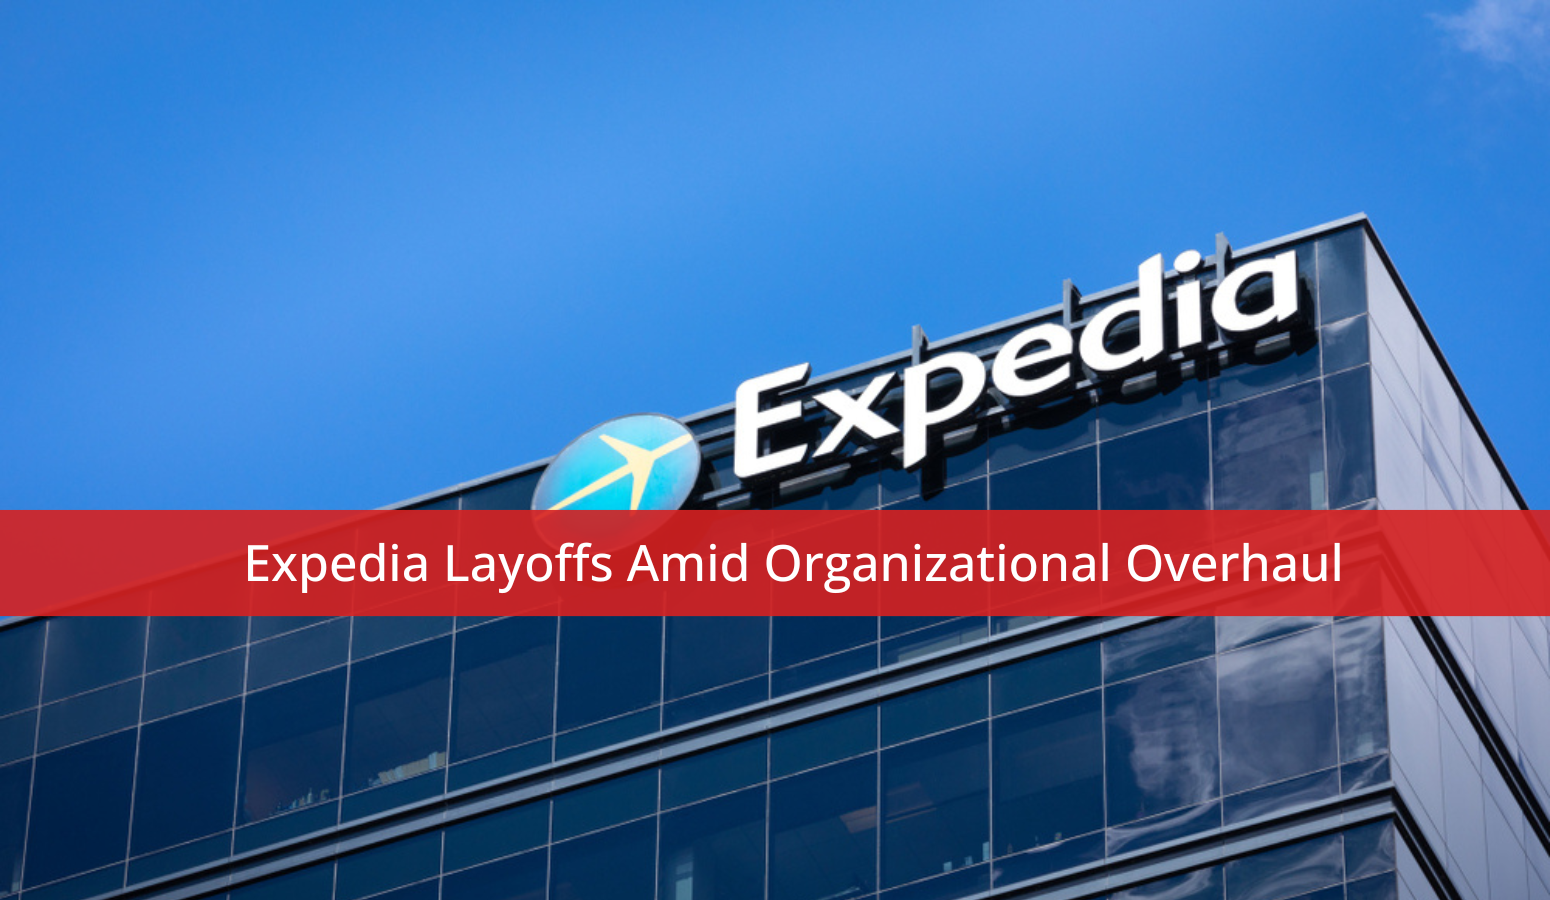 Featured image for “Expedia Layoffs Amid Organizational Overhaul”